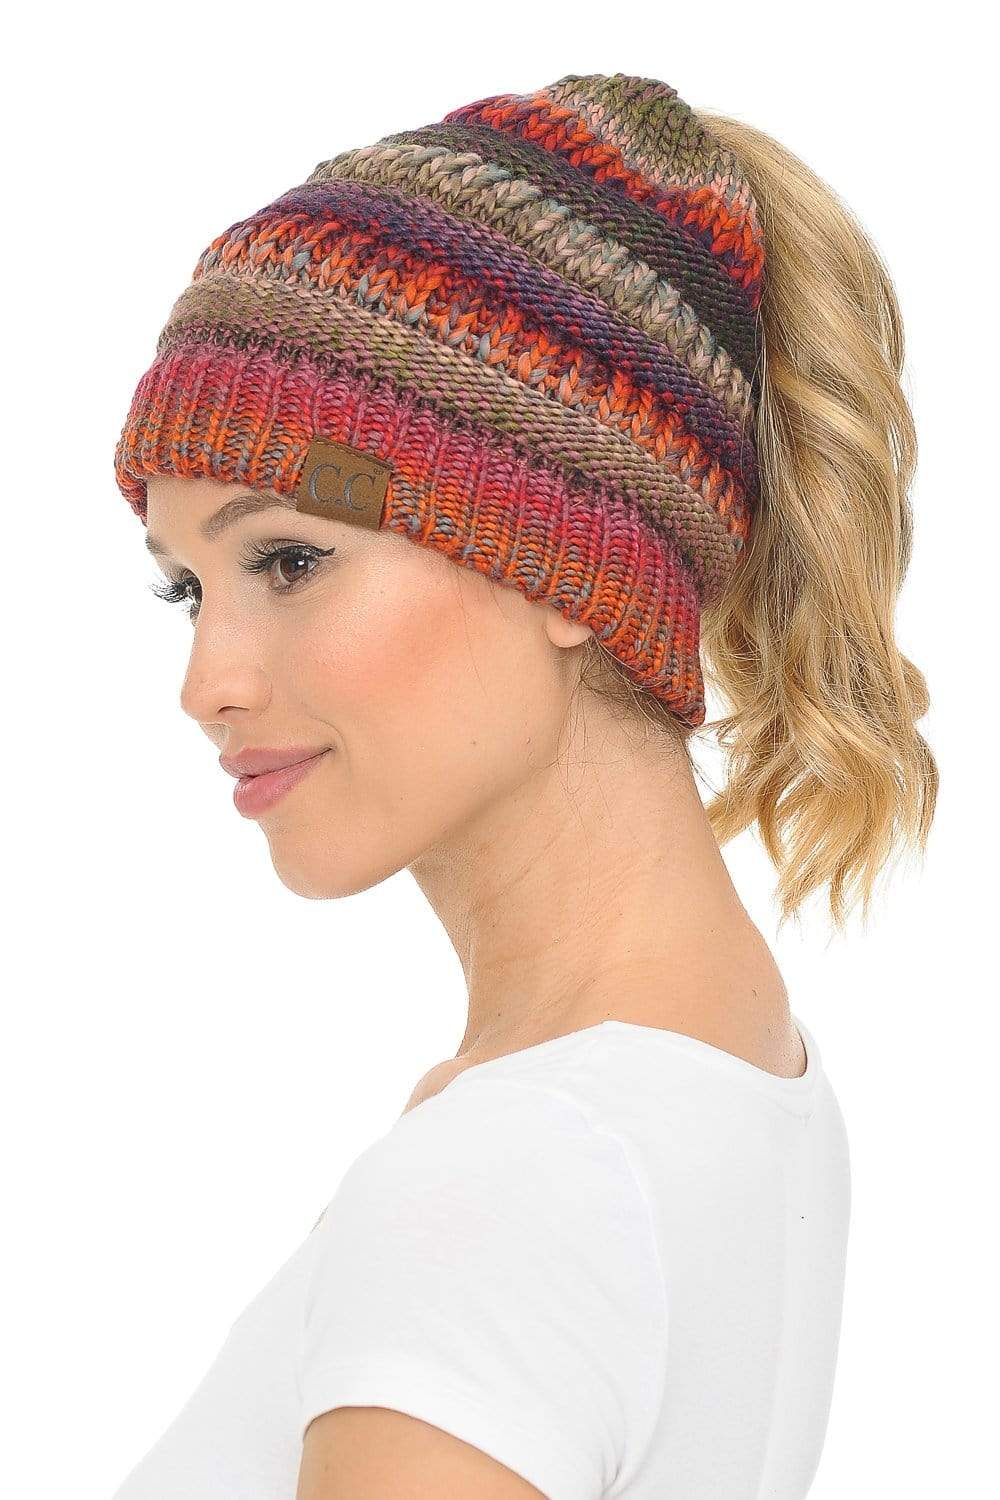 C.C Apparel Rust Mix Tribal C.C MB705 - Soft Stretch Cable Knit Warm Hat High Bun Ponytail Multi Color Tribal Beanie